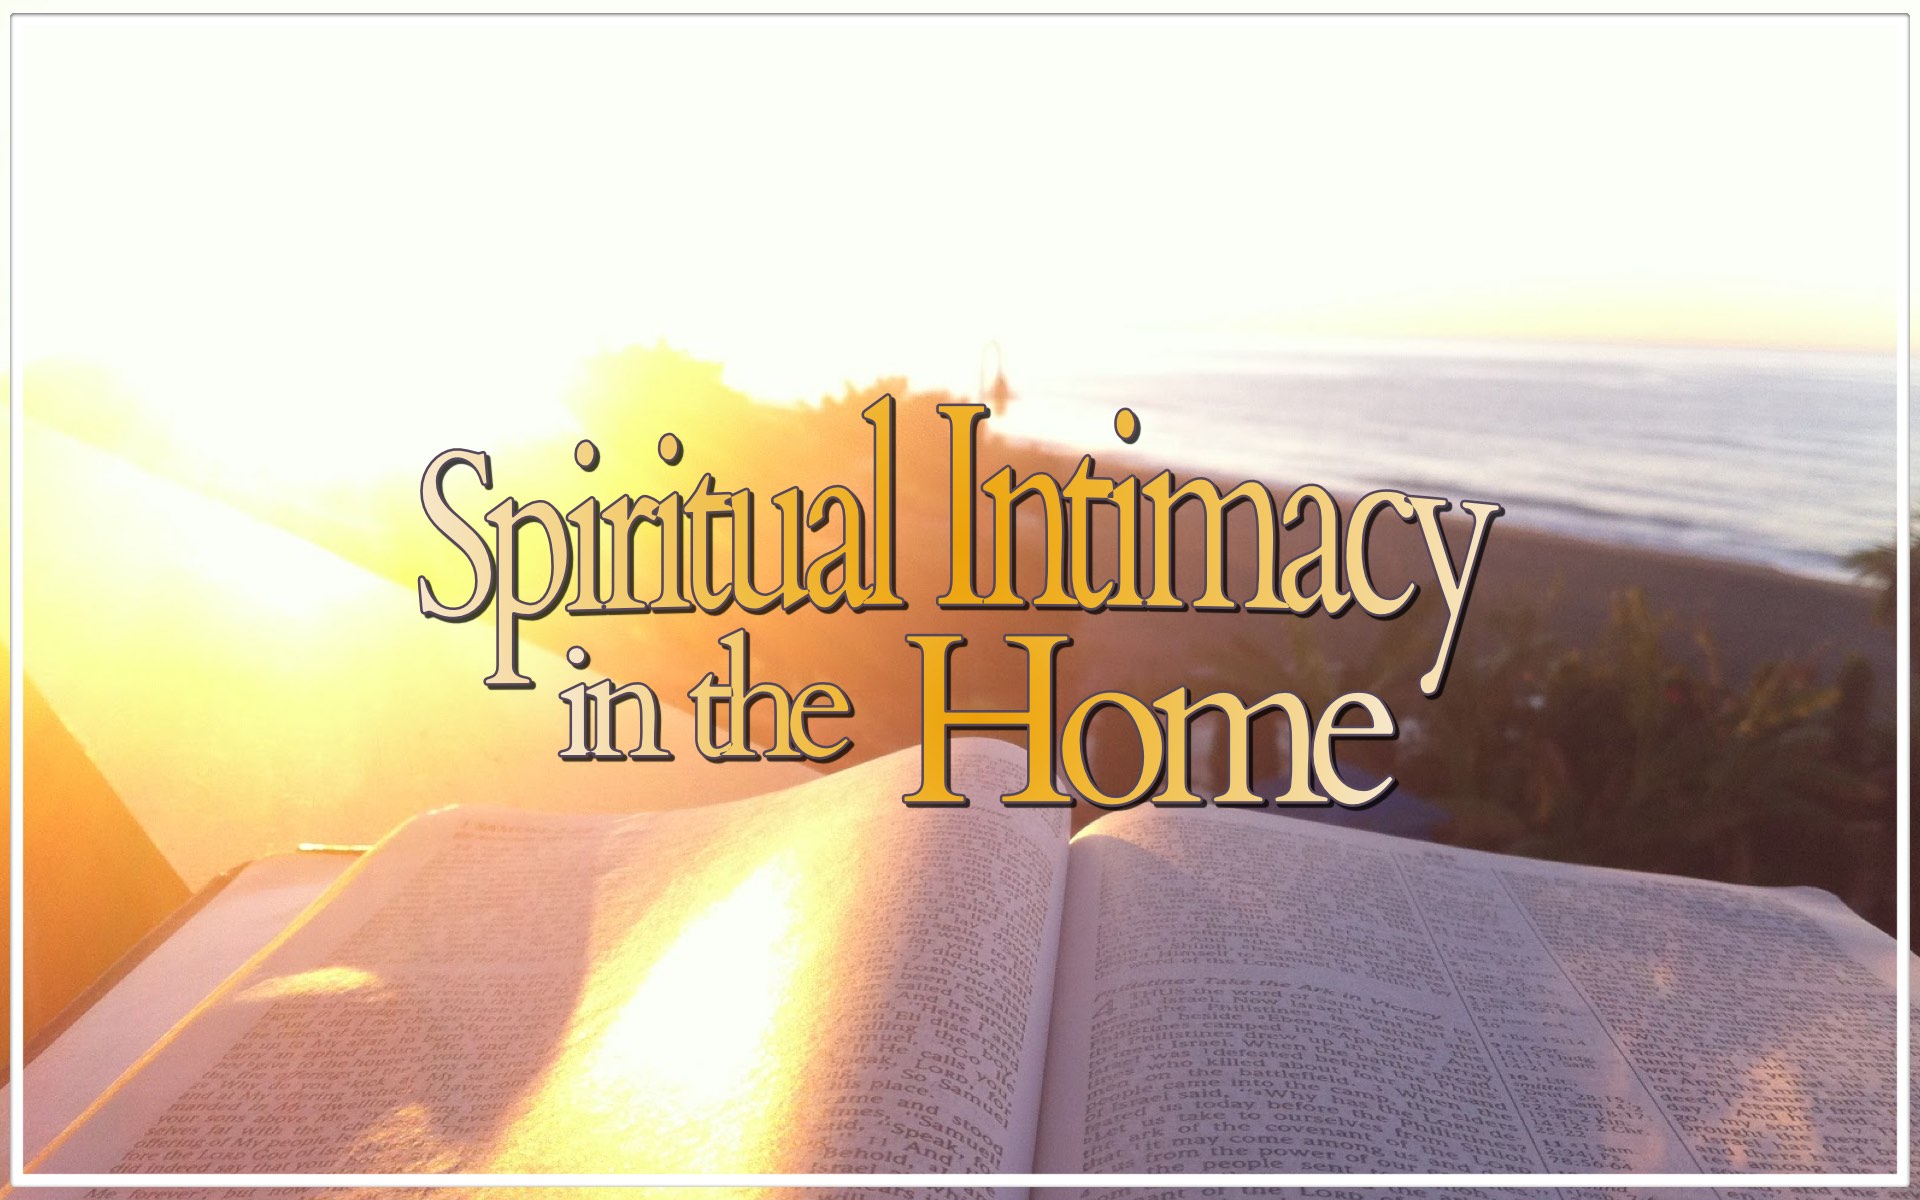 Spiritual Intimacy in the Home